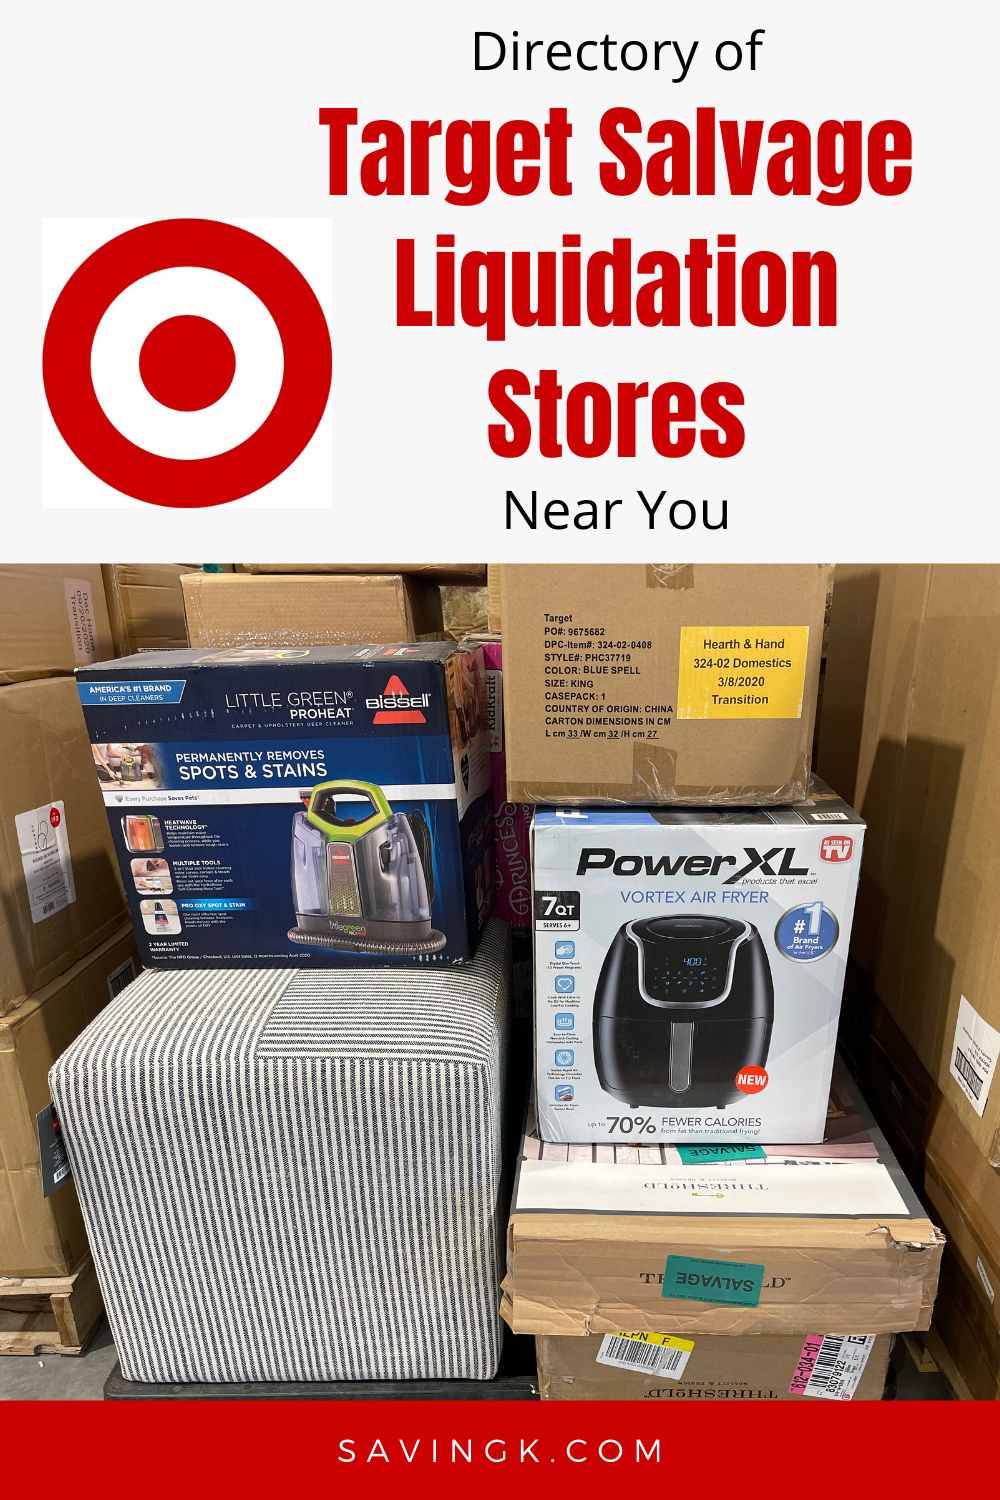 List of Target Salvage Liquidation Stores Near You